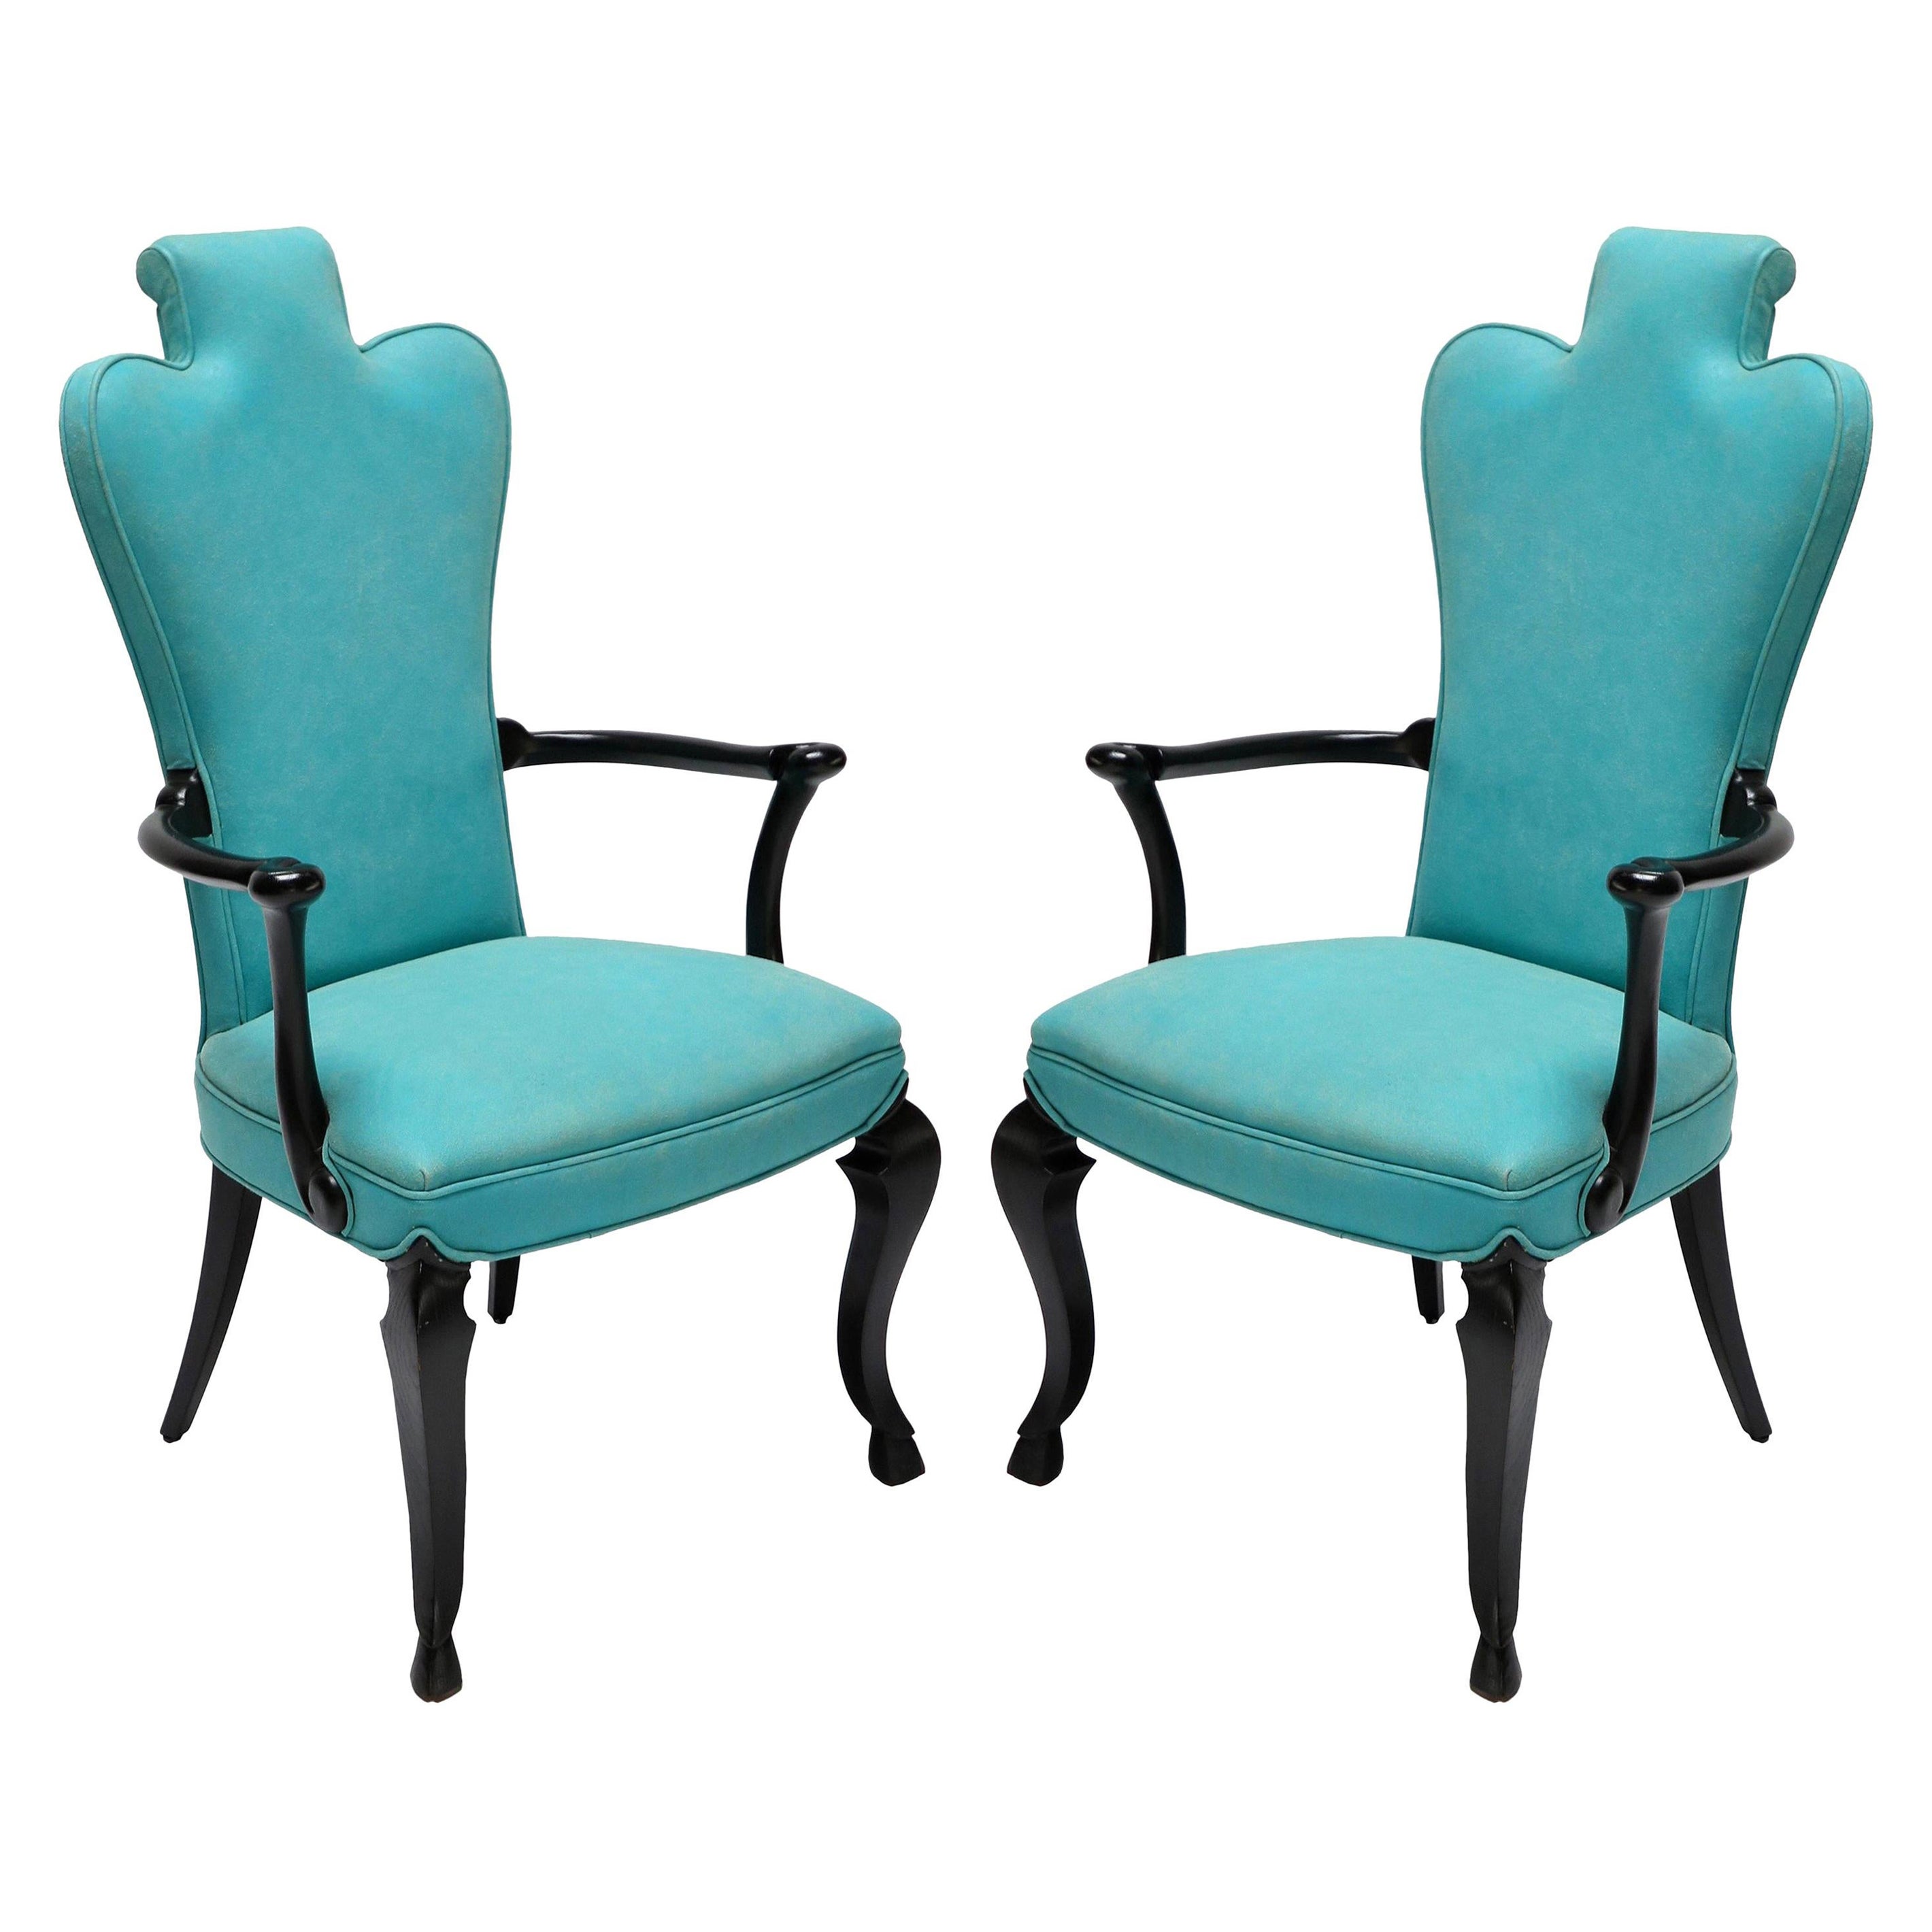 Pair of Custom Black Lacquer Armchairs in Turquoise Leather by Adesso Imports